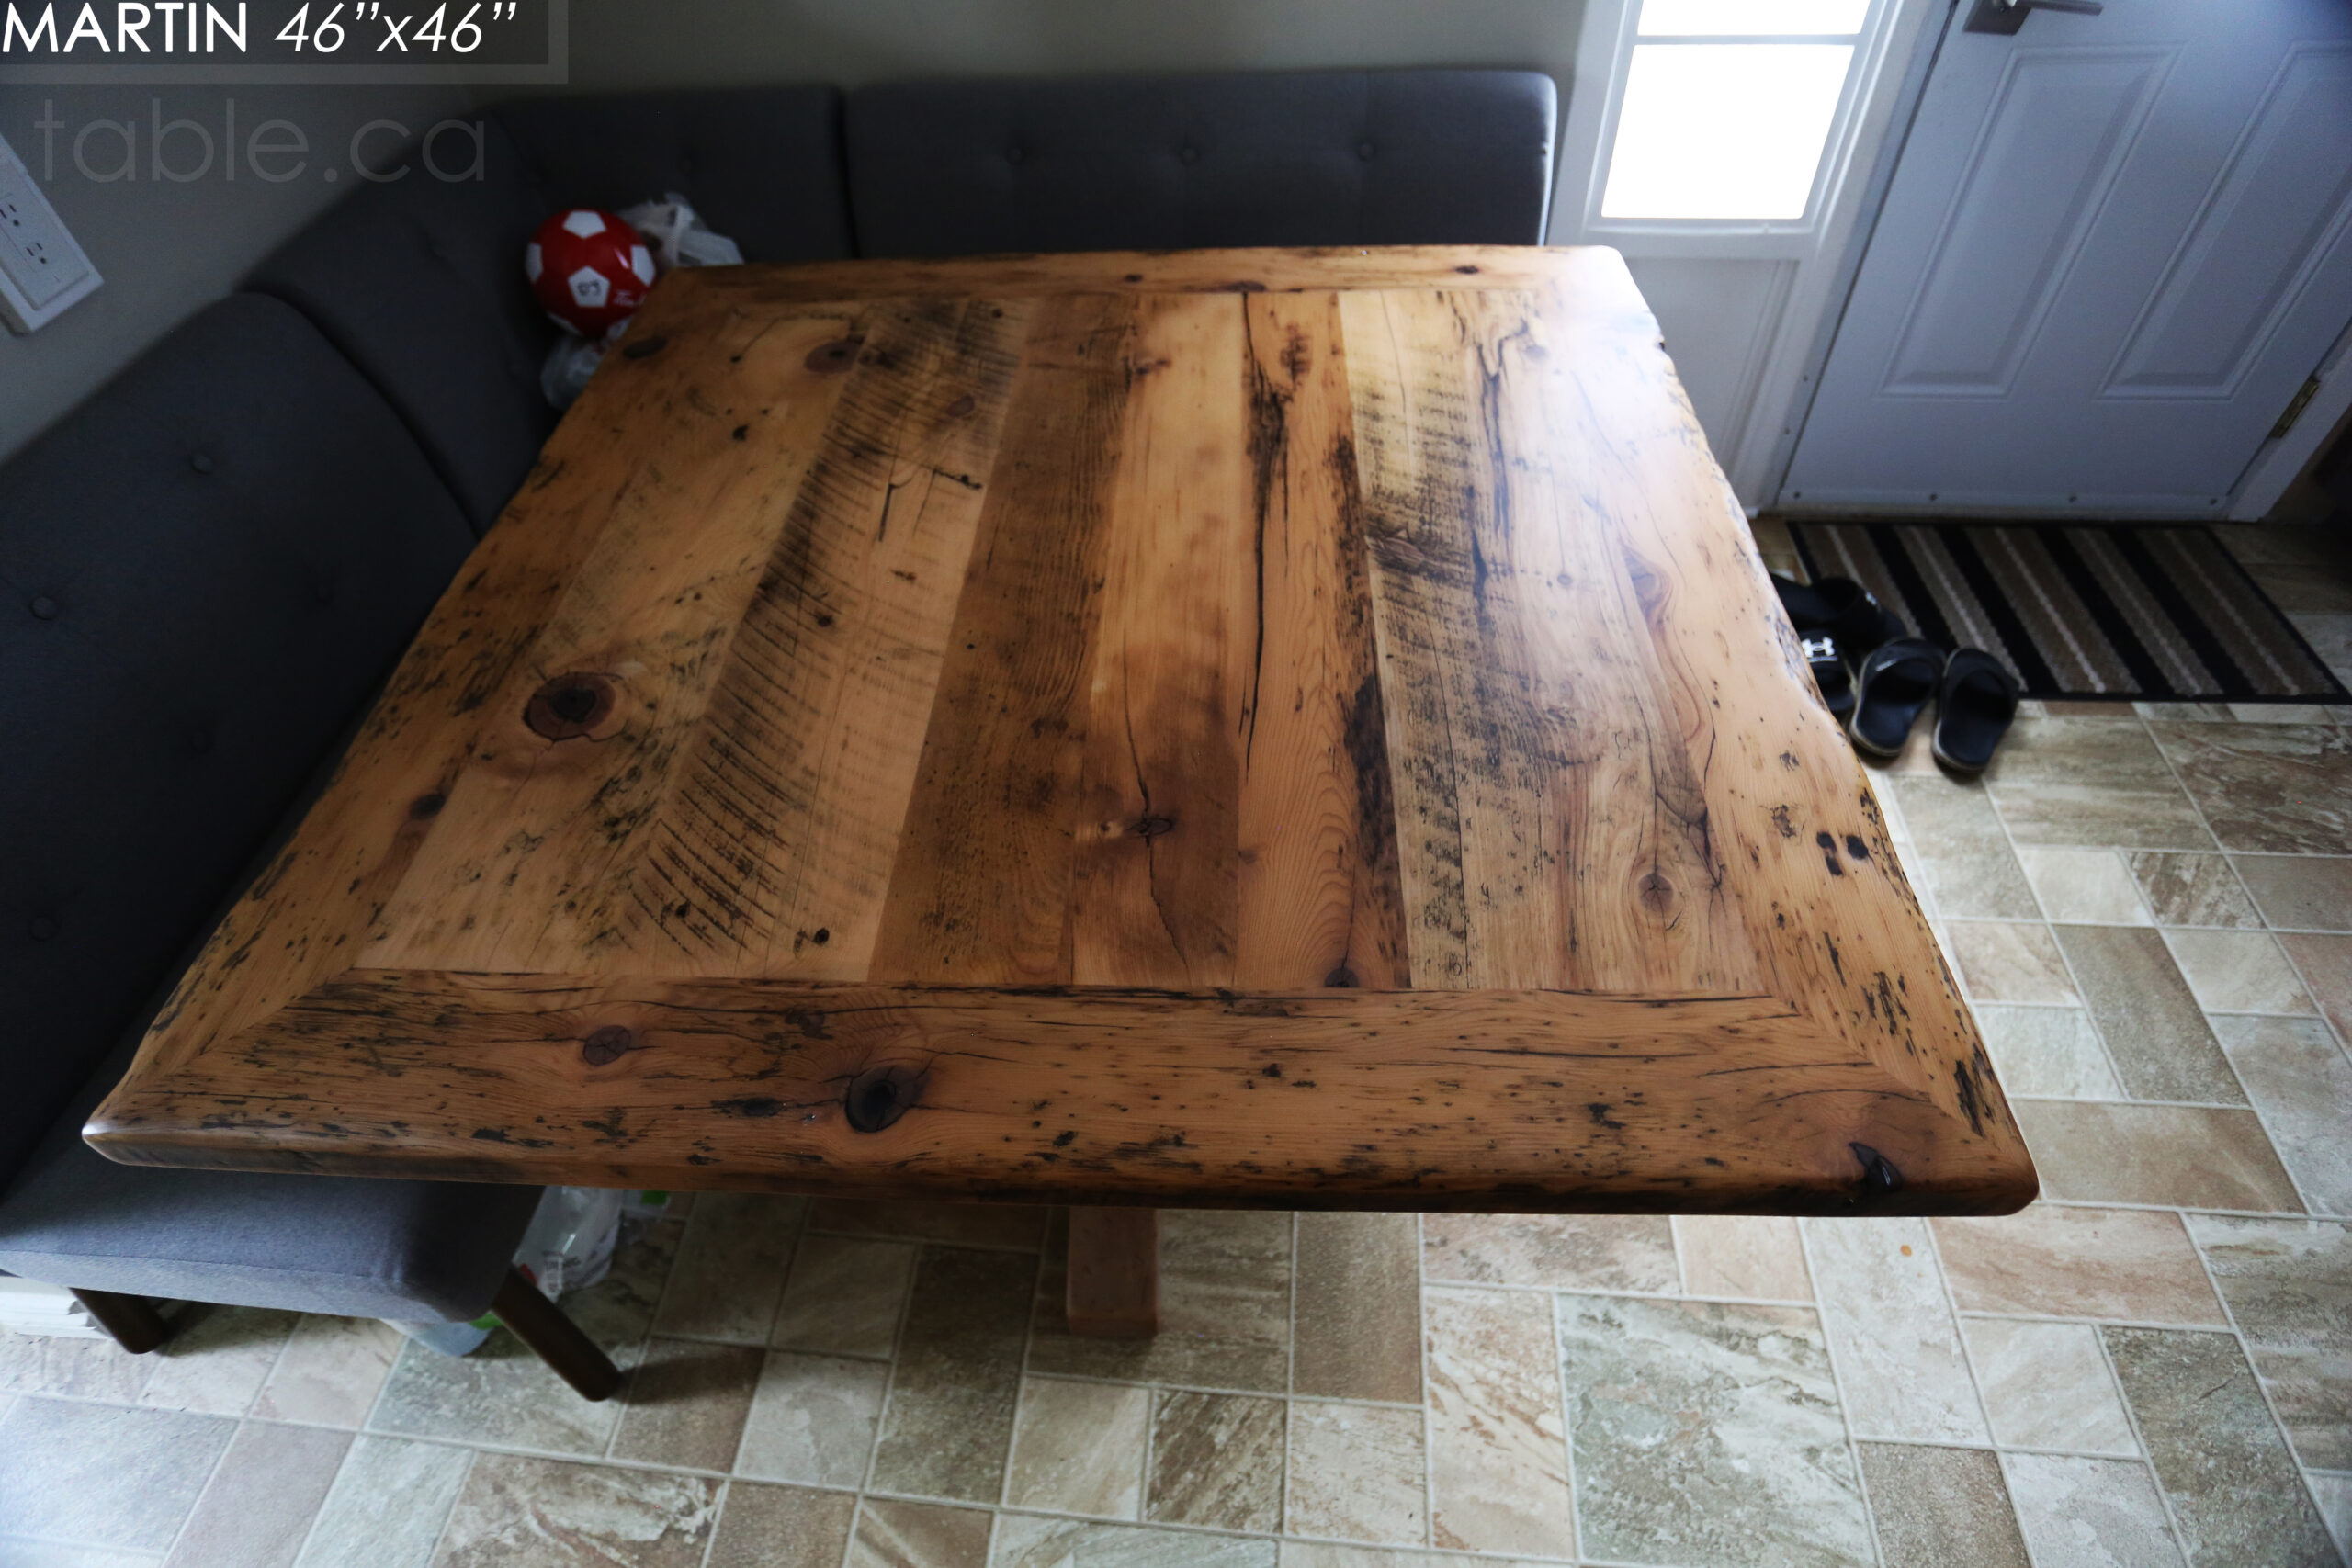 48" x 48" Reclaimed Wood Sqaure Table we made for a Burlington home - 28" height - Mitred Corners - Hand-Hewn Beam Pedestals Base - Original edges & distressing maintained - Hemlock Threshing Floor Construction - Greytone Treatment Option to maintain the light colour of unfinished - www.table.ca